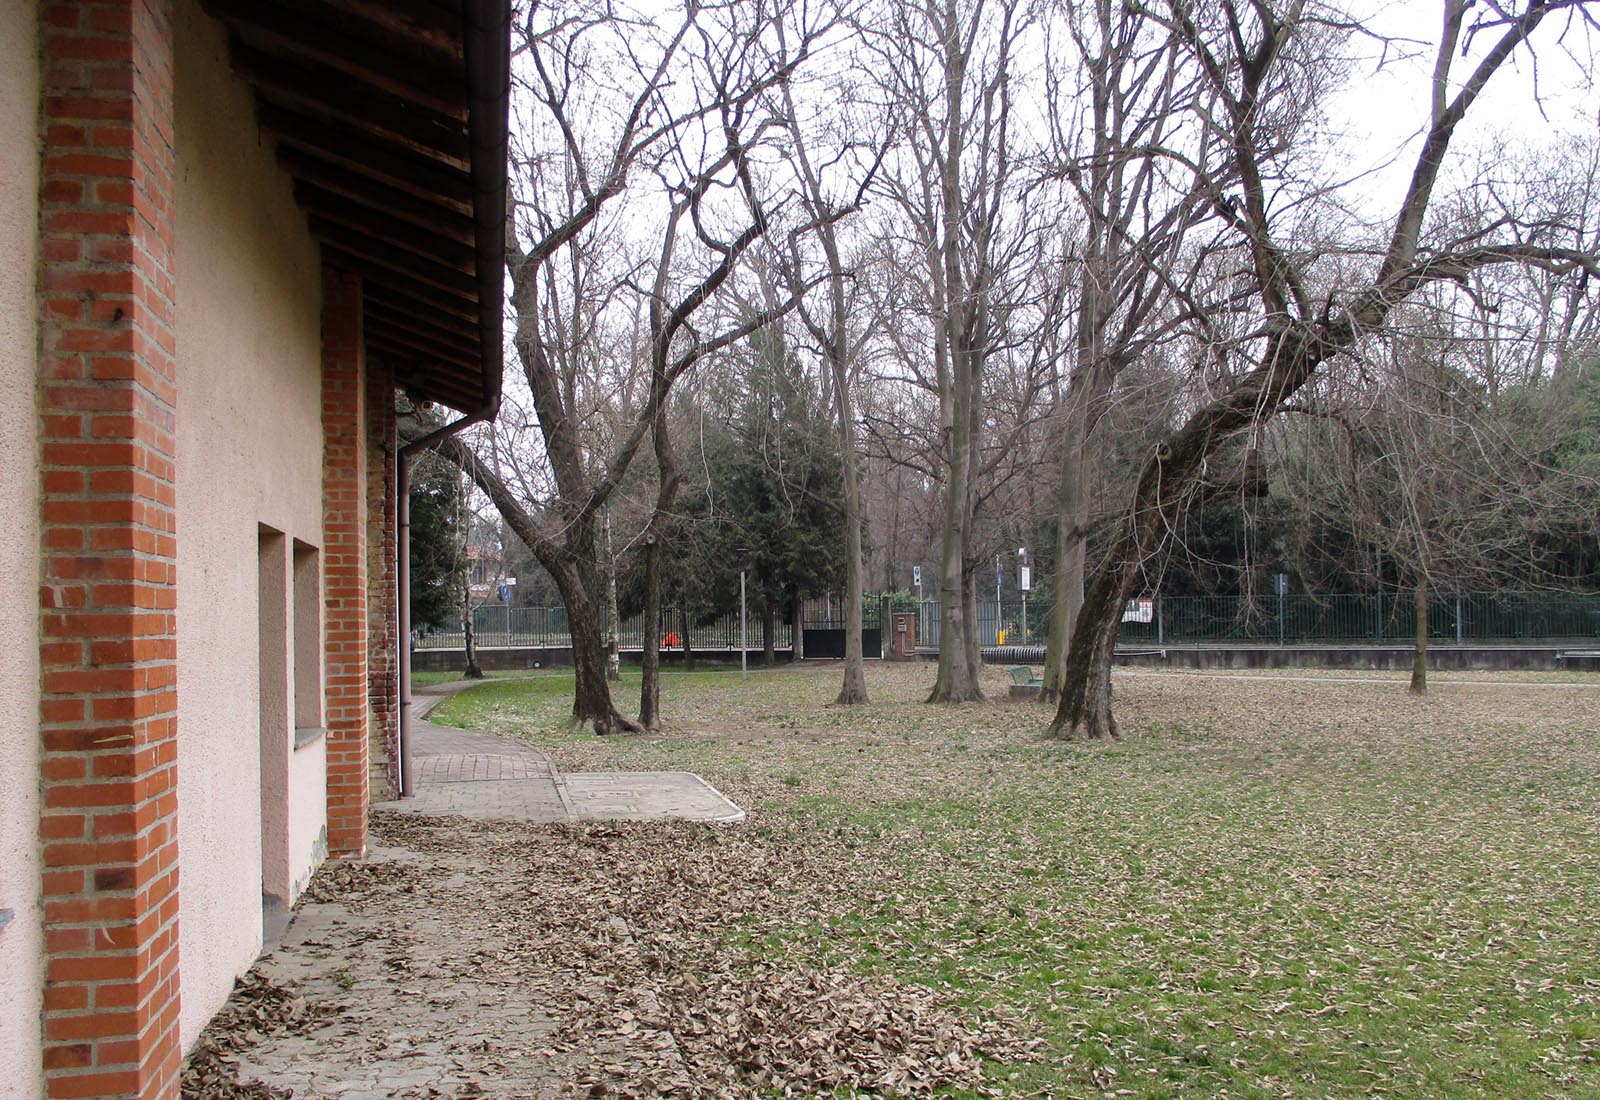 House in the Caduti Nassirya park in Somma Lombardo - View of the existing building